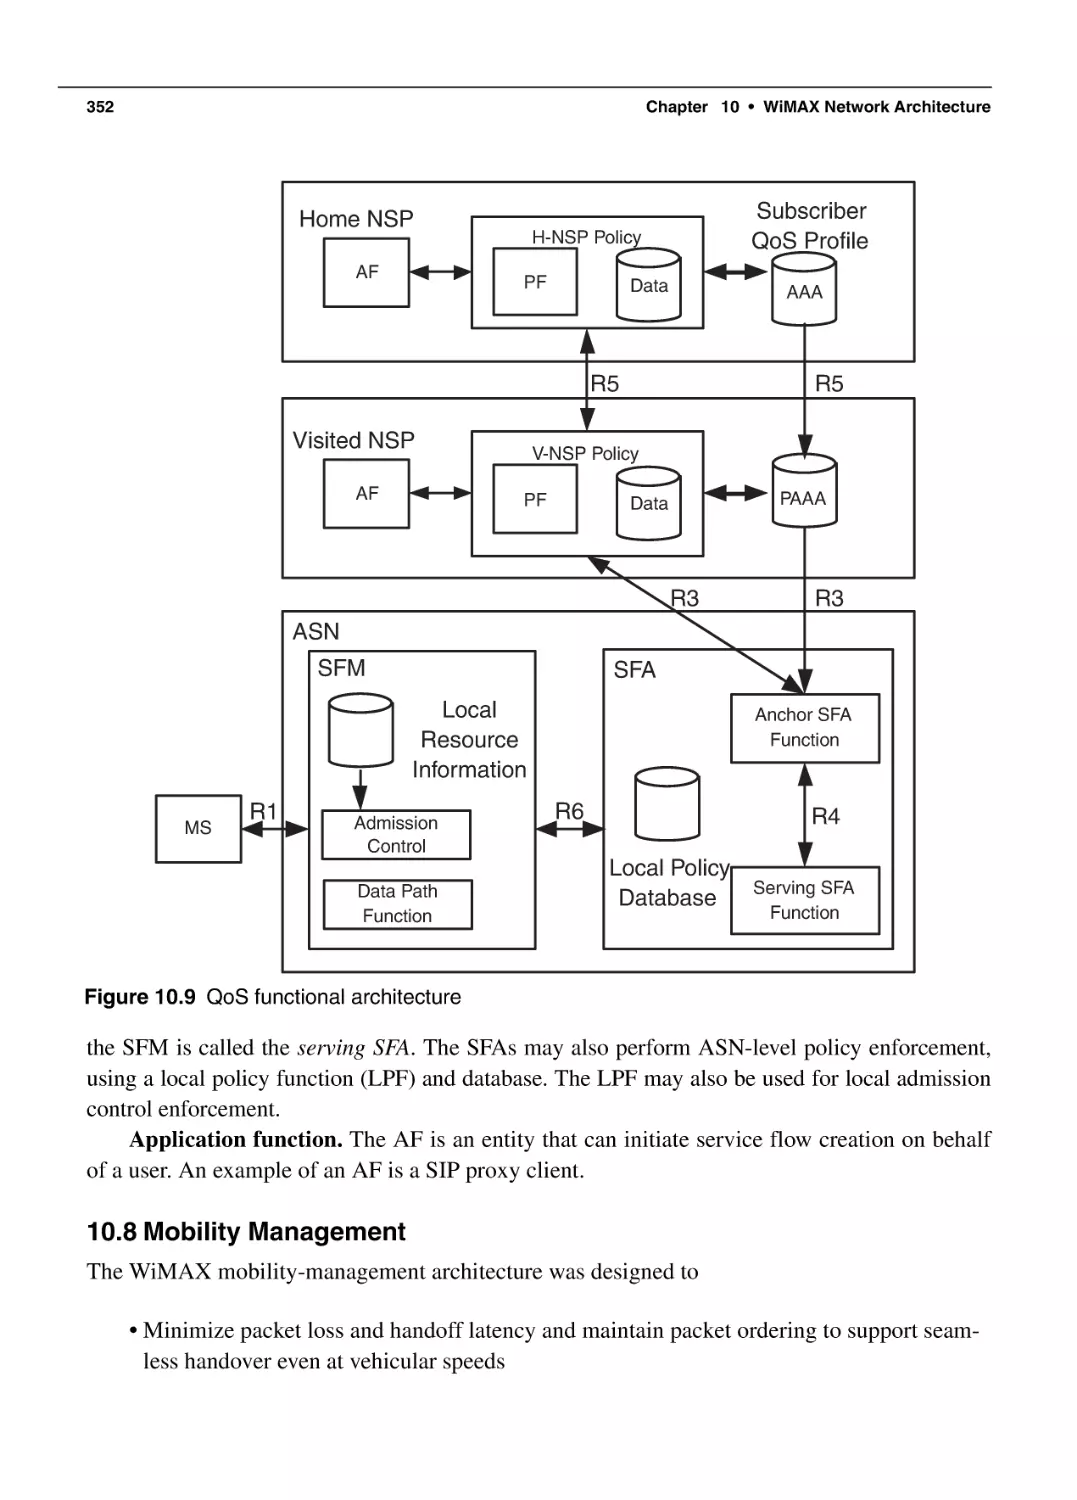 10.8 Mobility Management